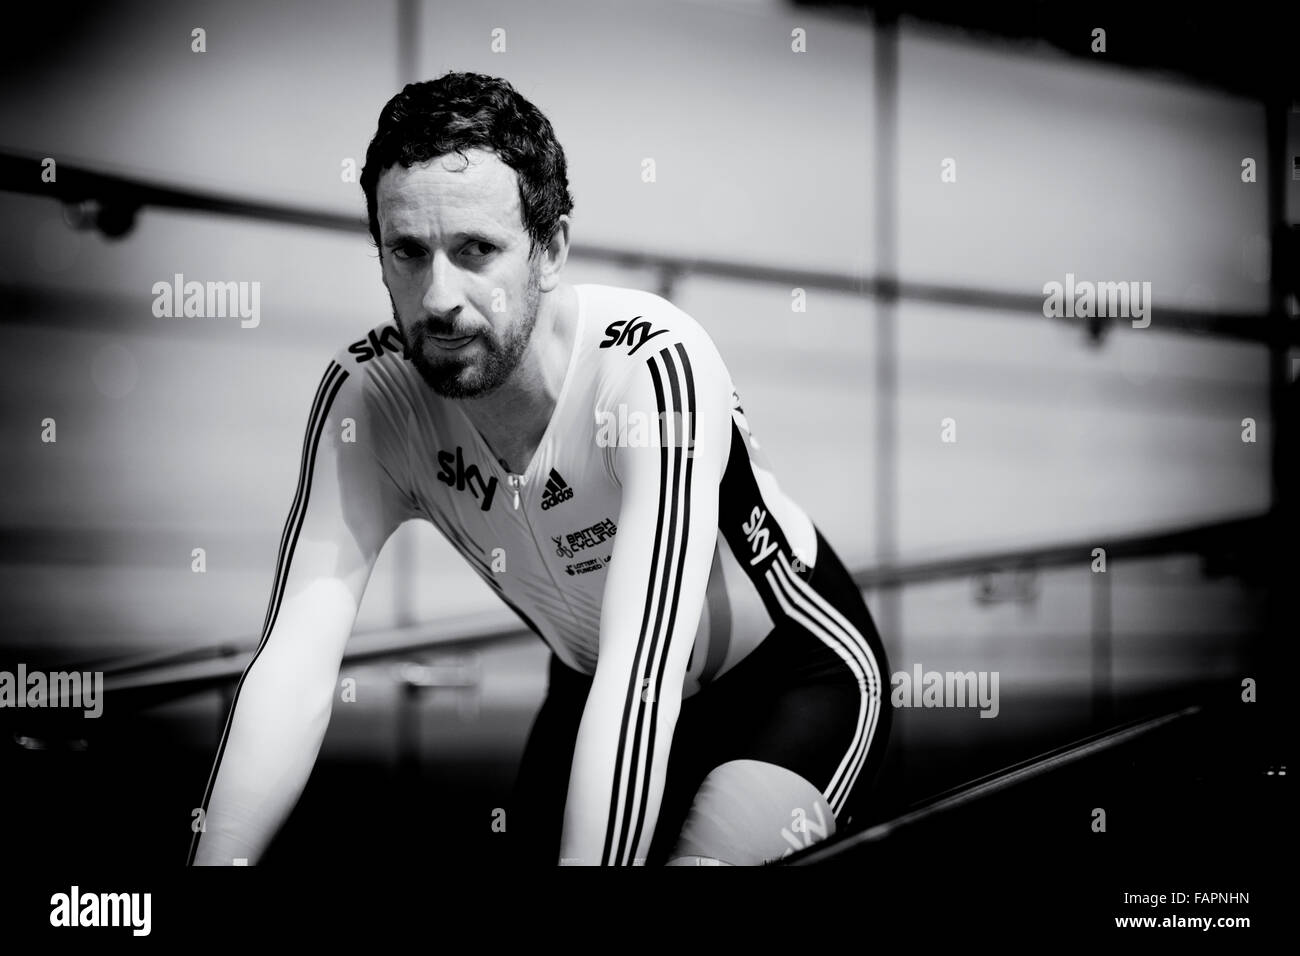 Sir Bradley Wiggins is pictured during the Revolution Series at Derby Arena, Derby, United Kingdom on 16 August 2015 Stock Photo